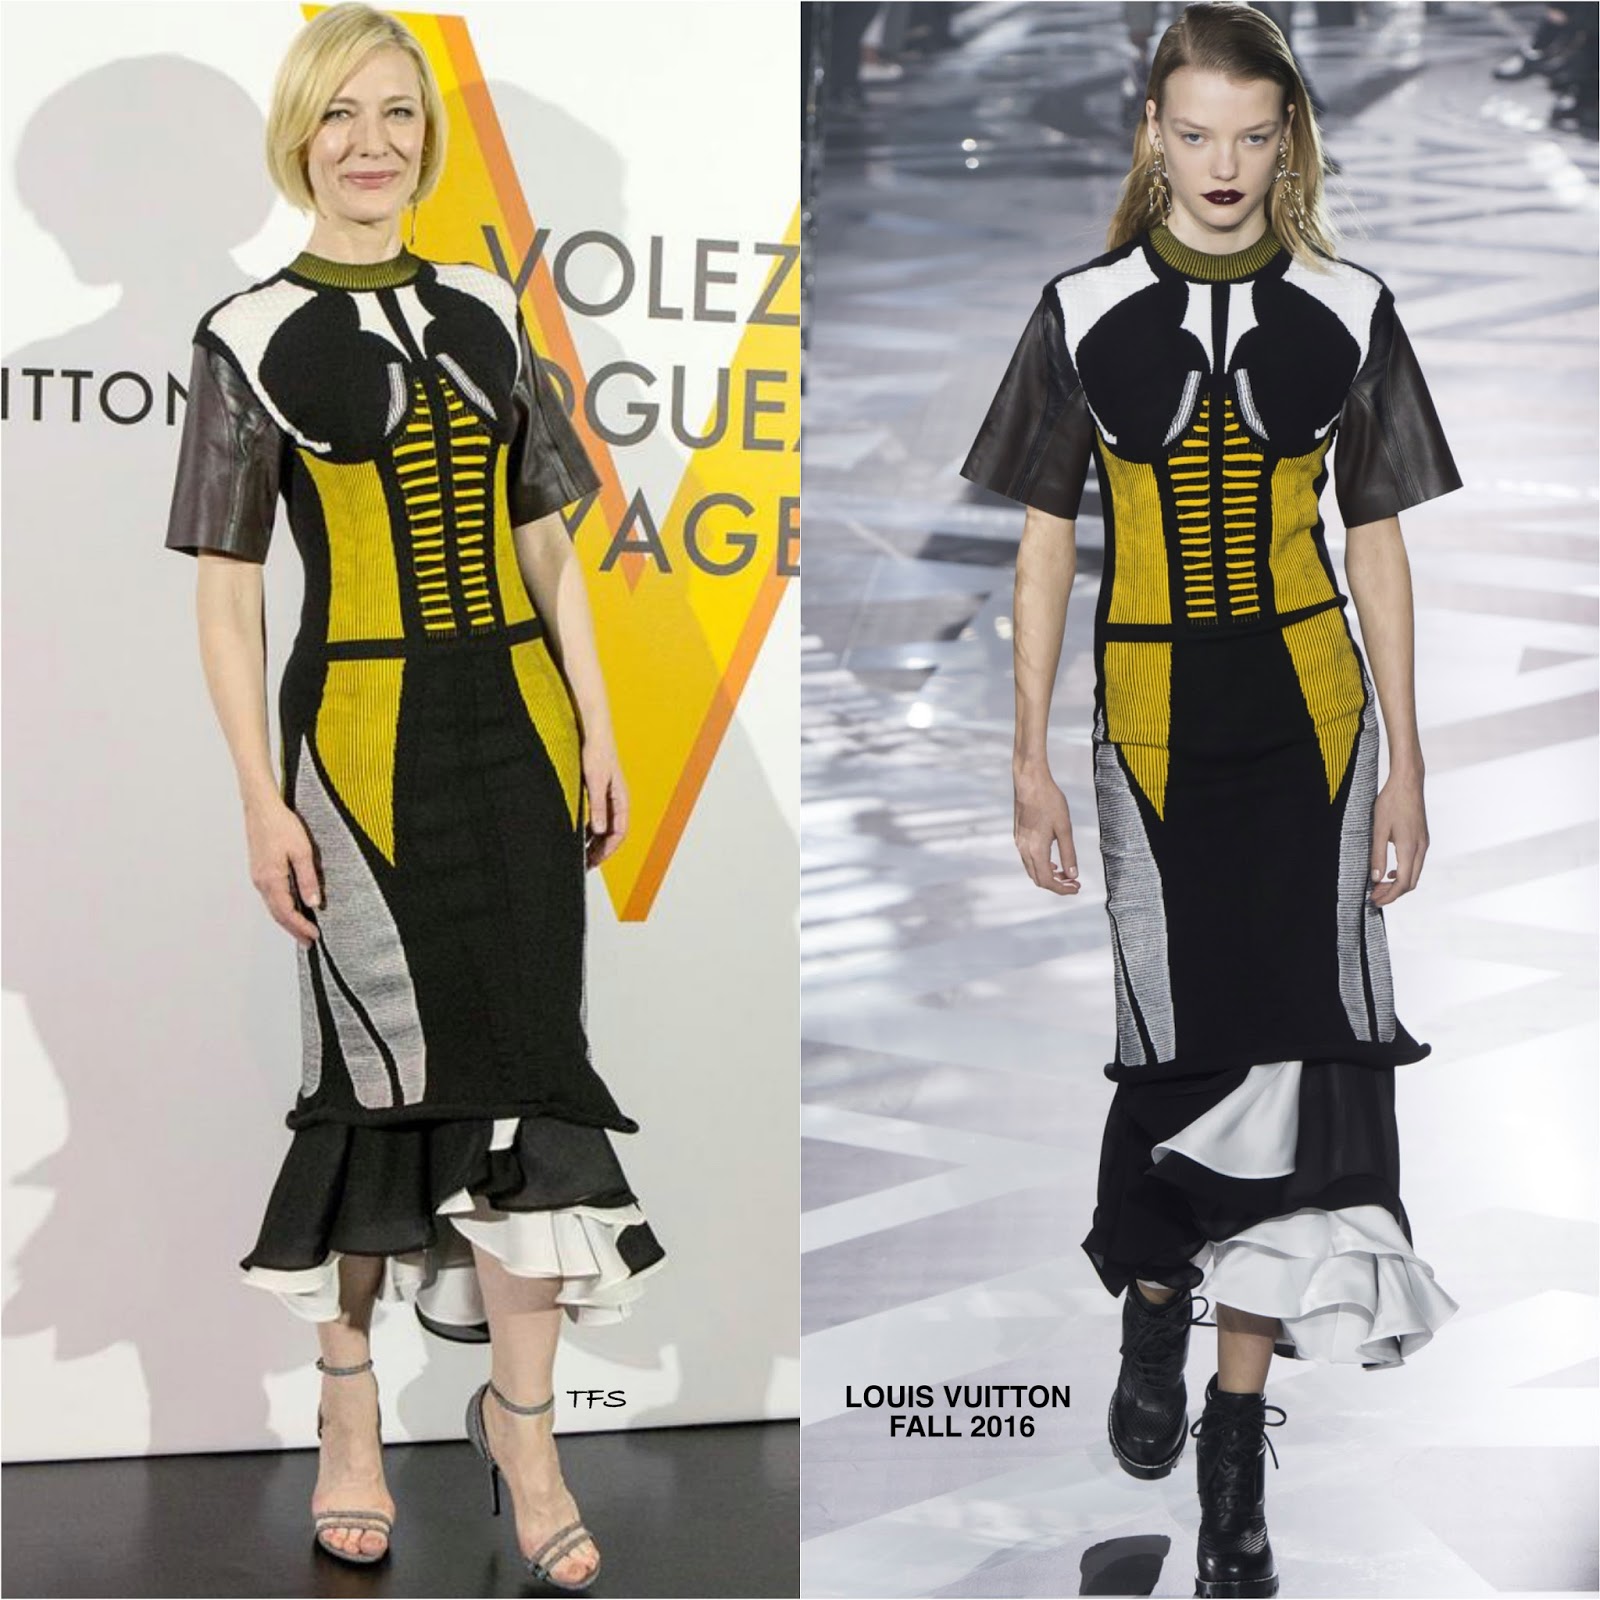 Cate Blanchett Wore a Louis Vuitton Dress With Bejeweled Pockets